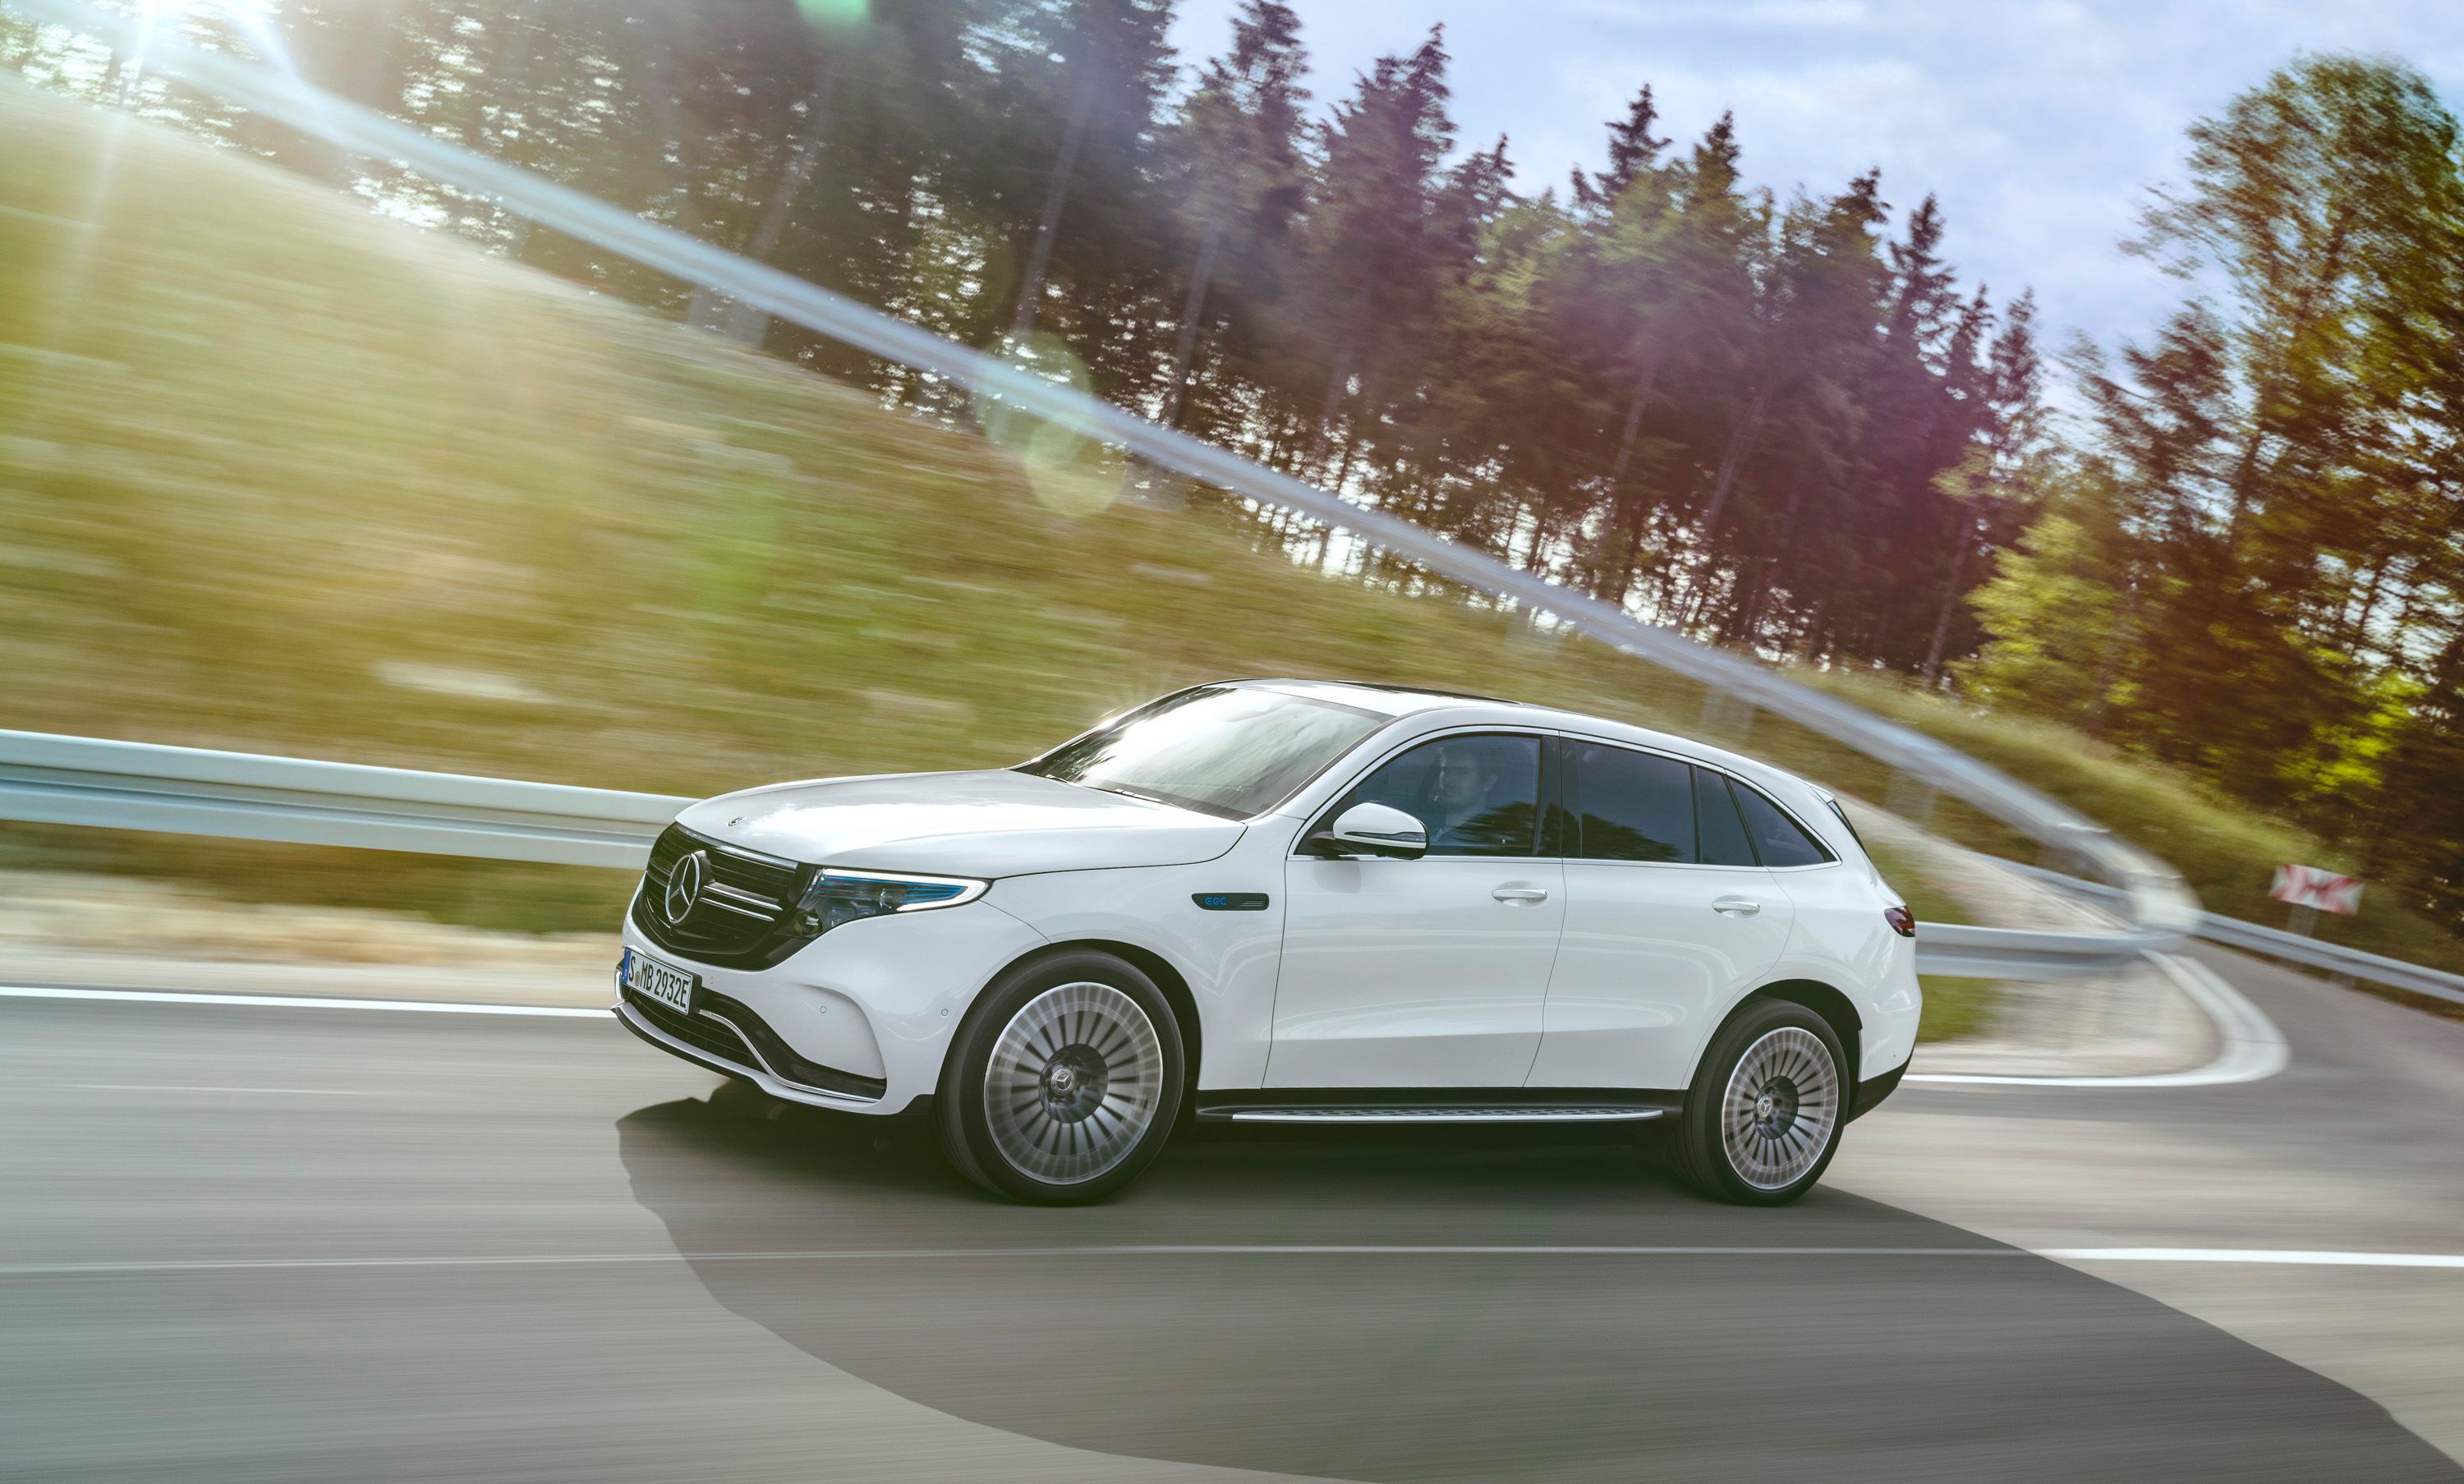 2020 12 Important Facts You Need to Know about the Mercedes EQC